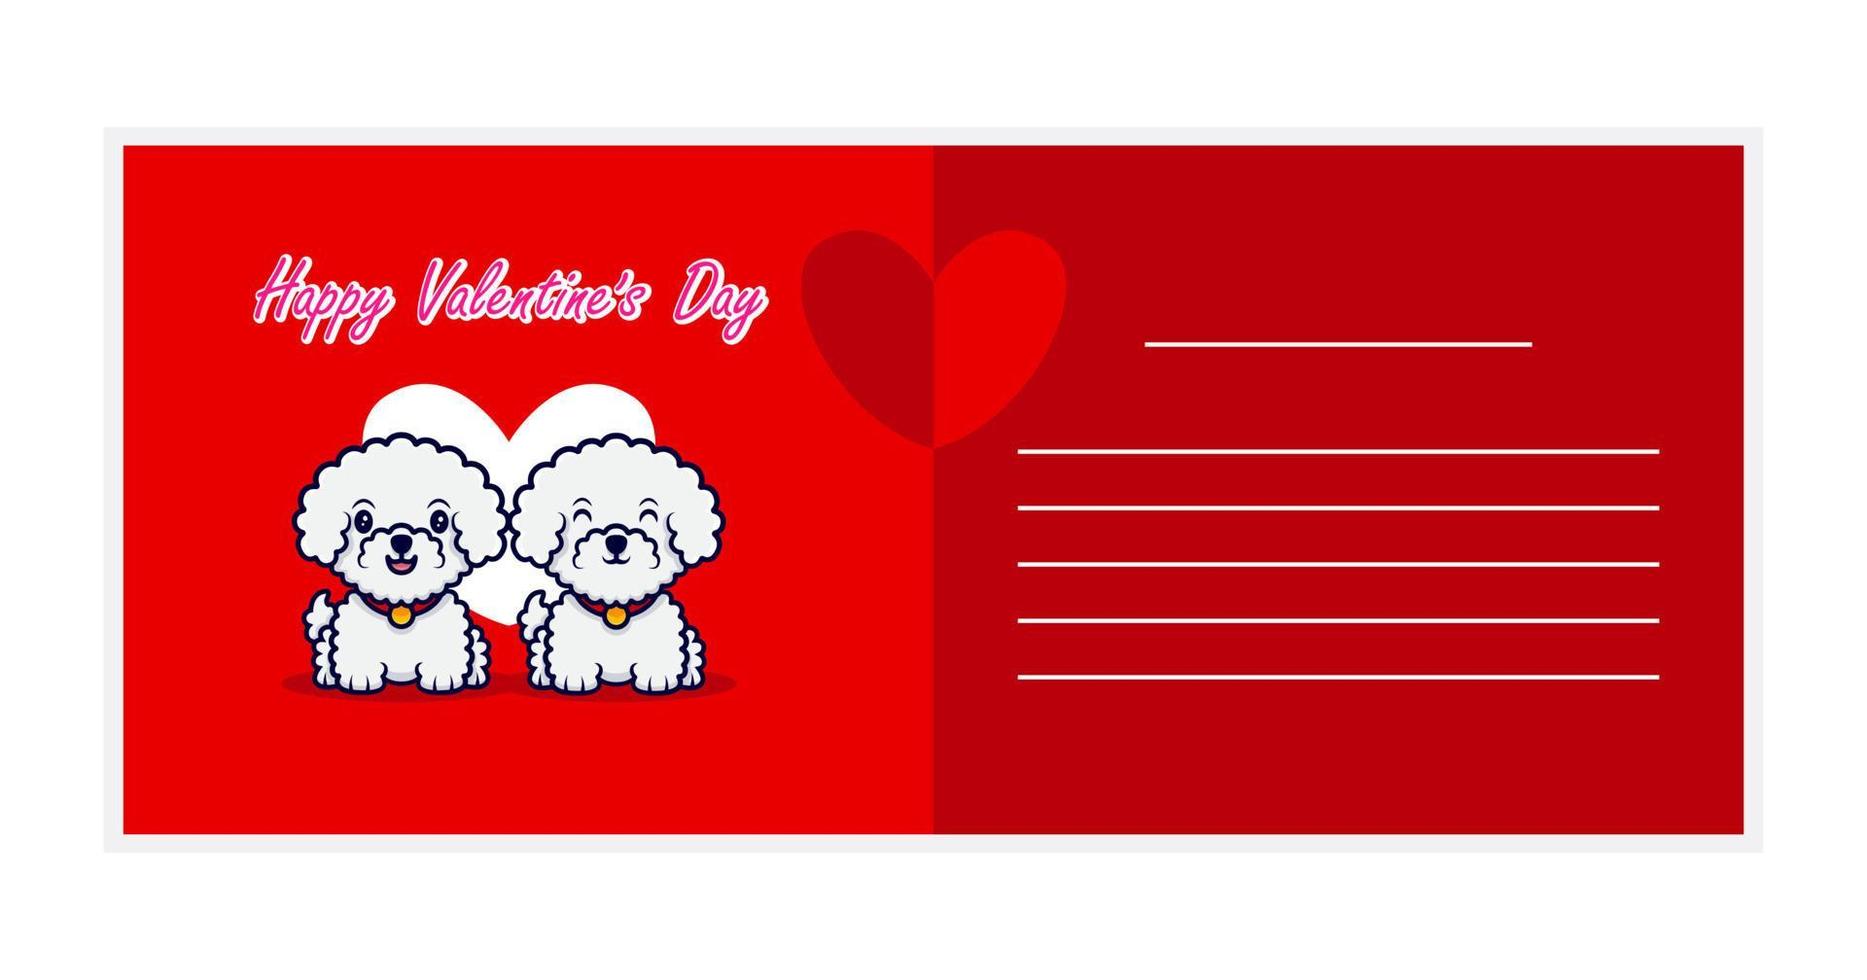 Happy Valentine Day Greetings Card With Cute Couple Dog vector